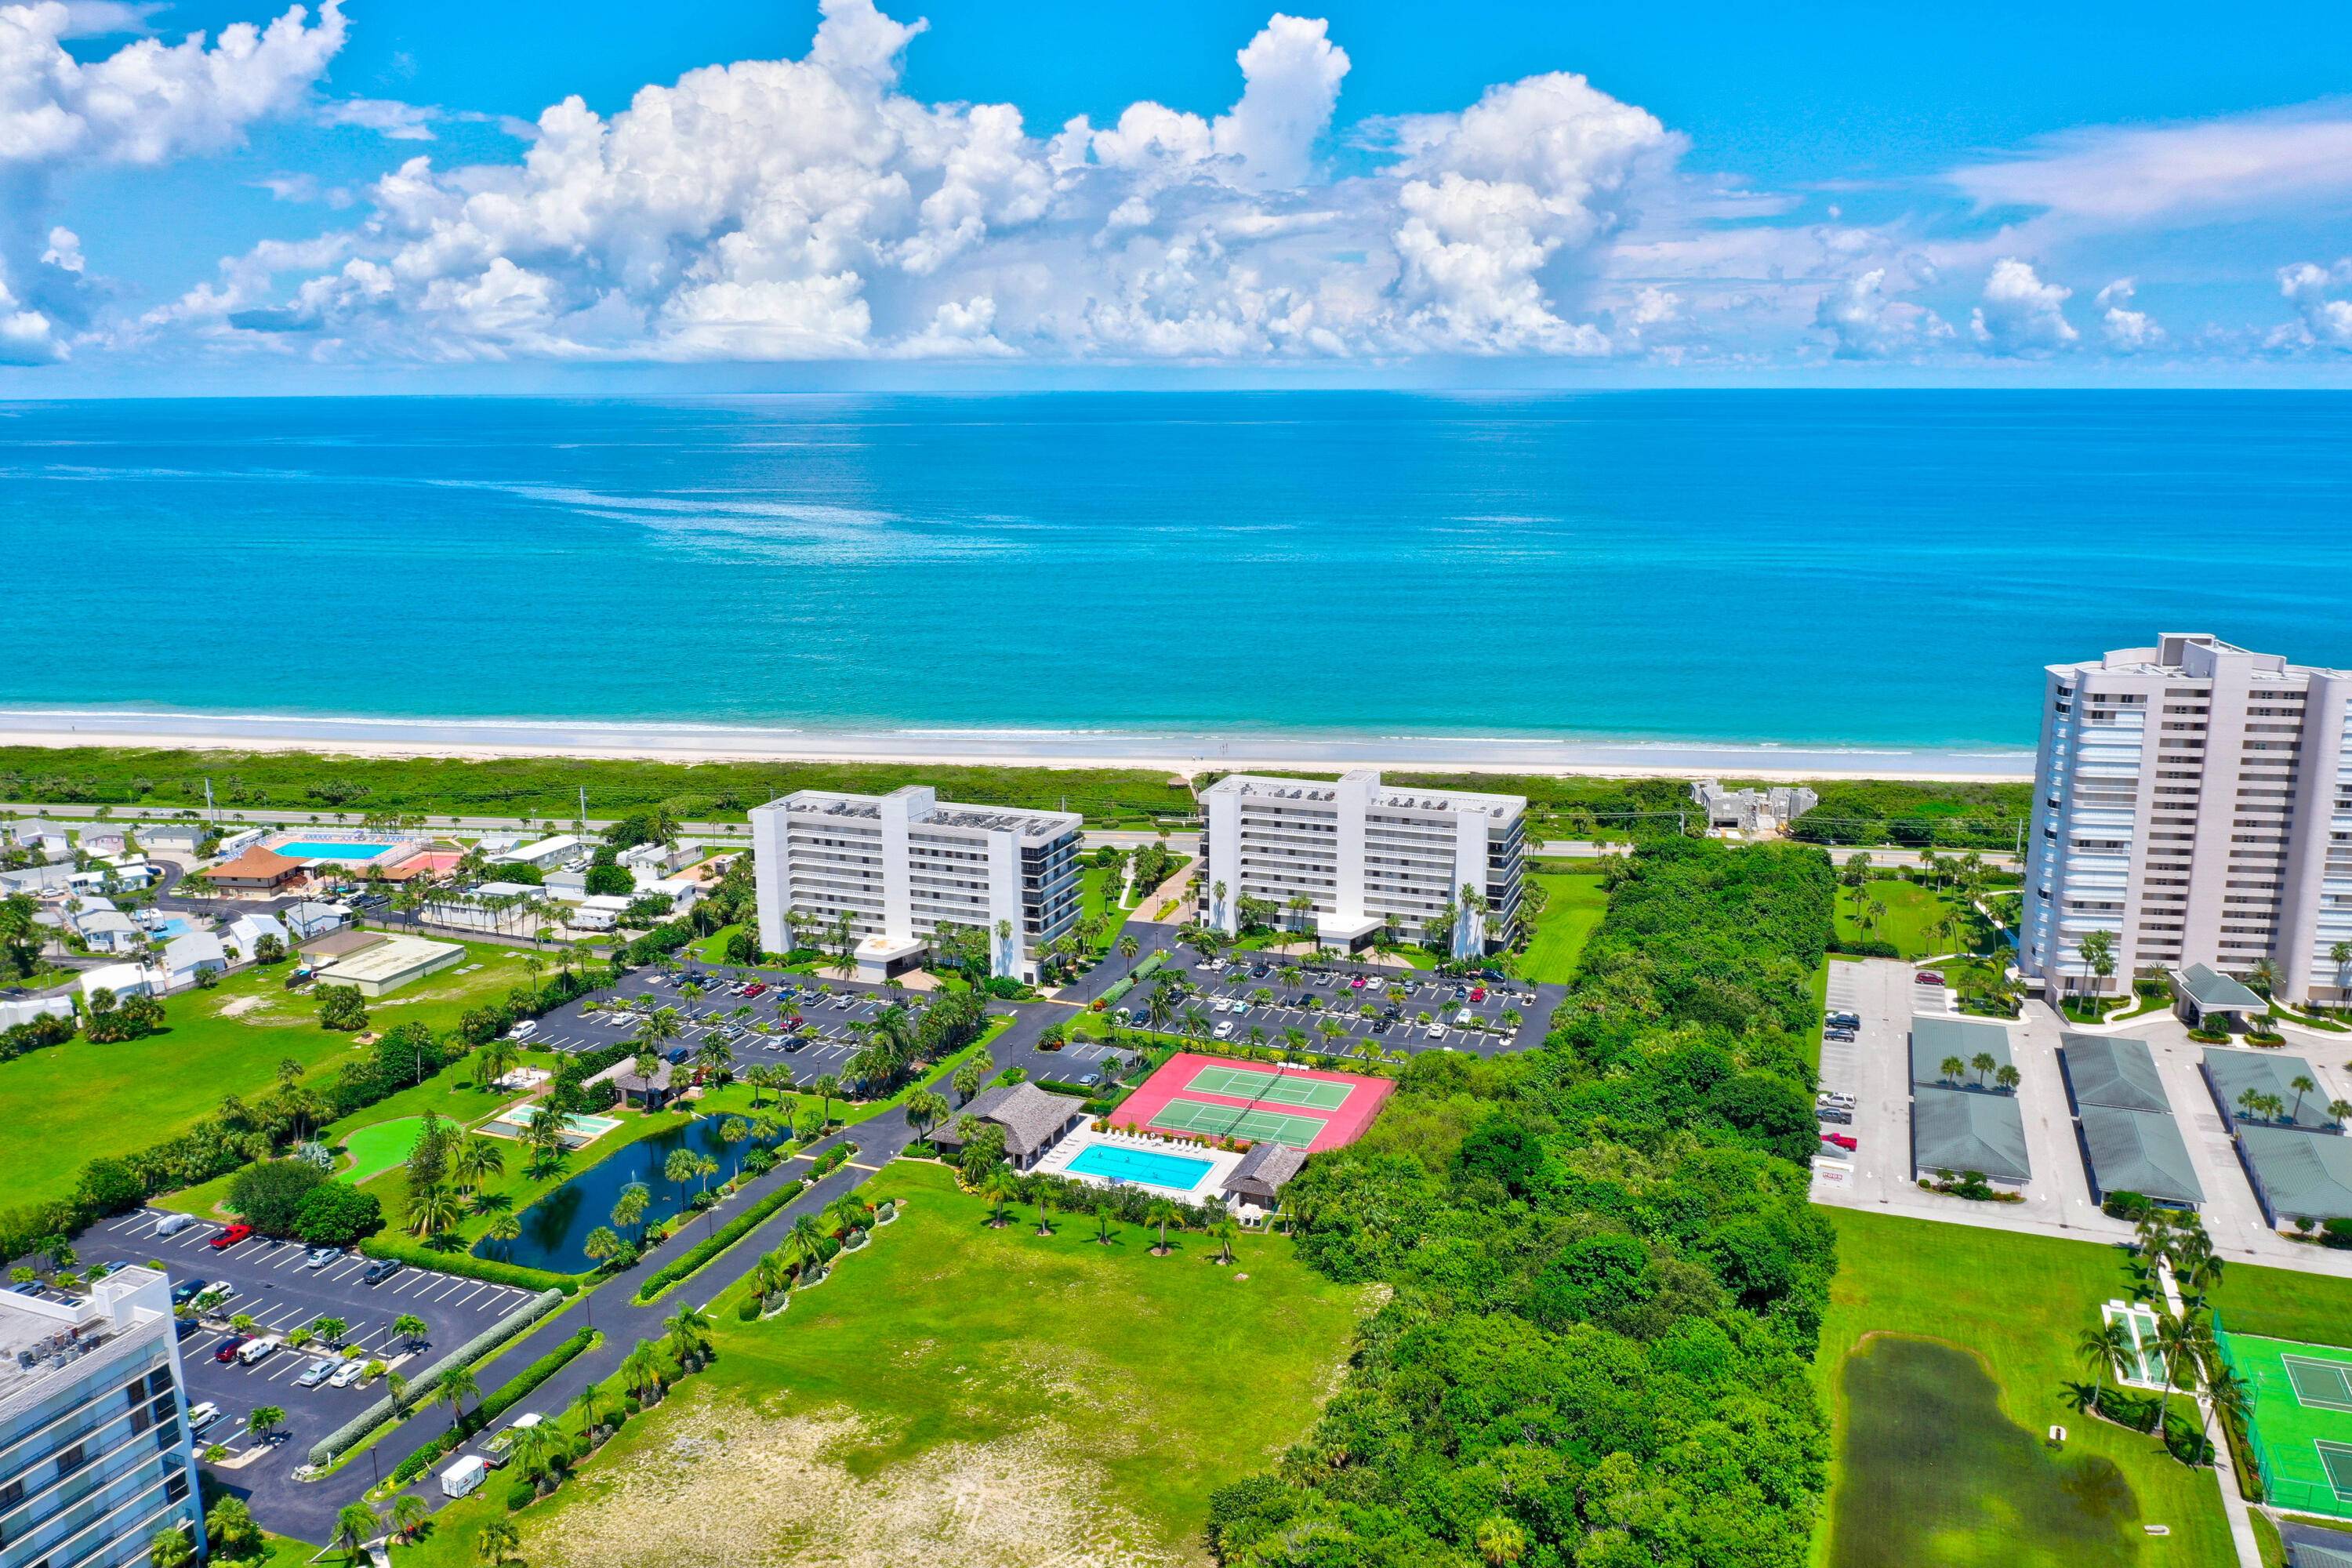 Experience unparalleled luxury at one of the most exquisite oceanfront condos located in the Treasure Coast.